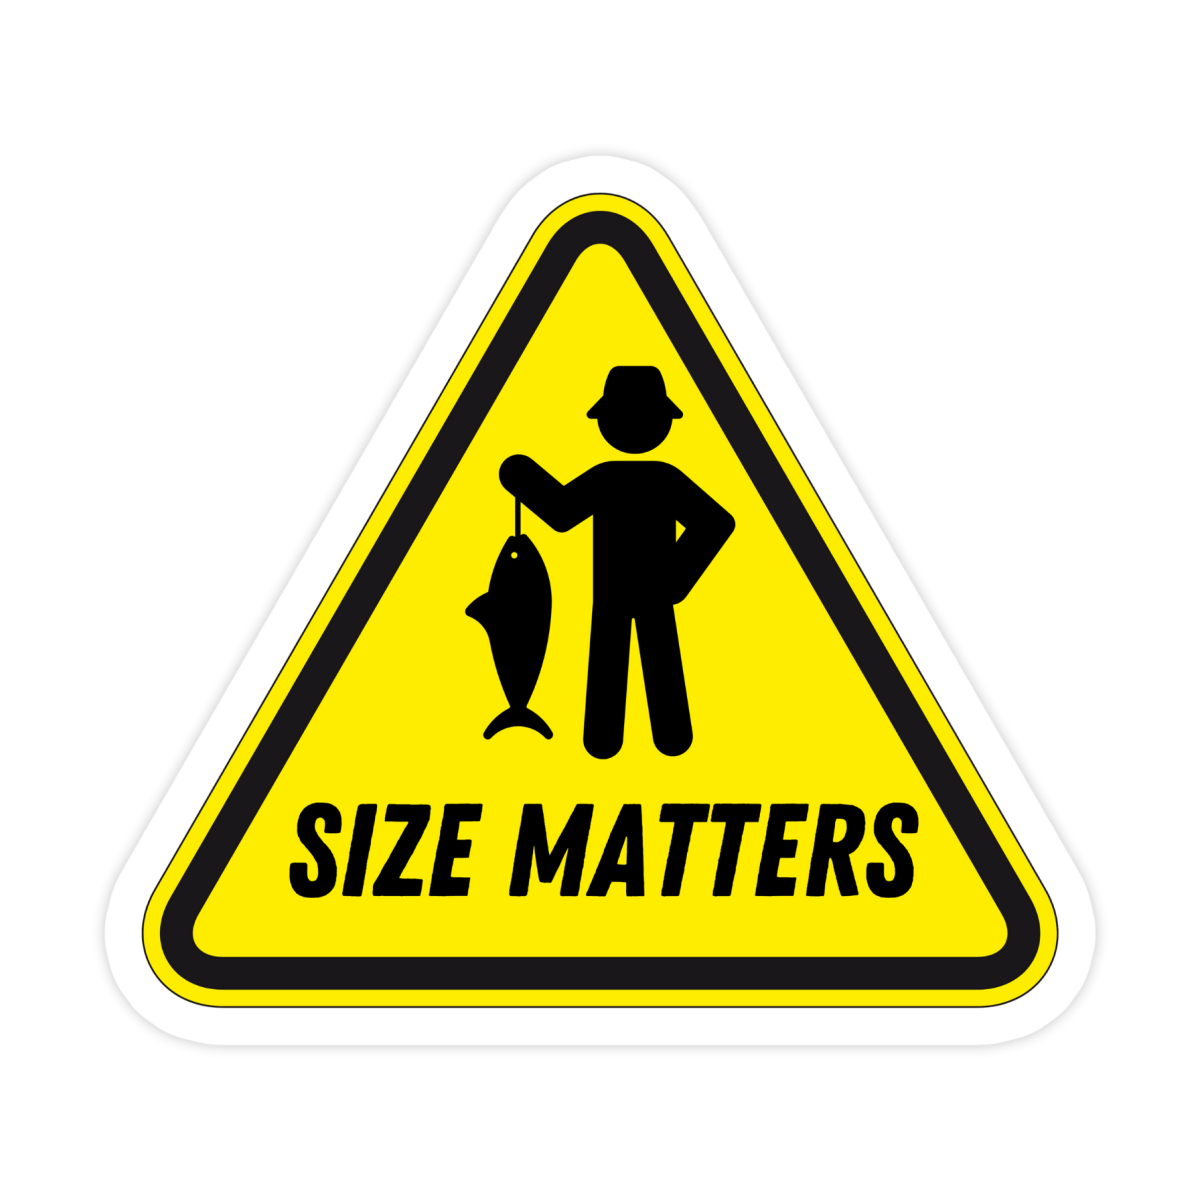 Size Matters Sticker  Catch Humor with Your Fishing Gear